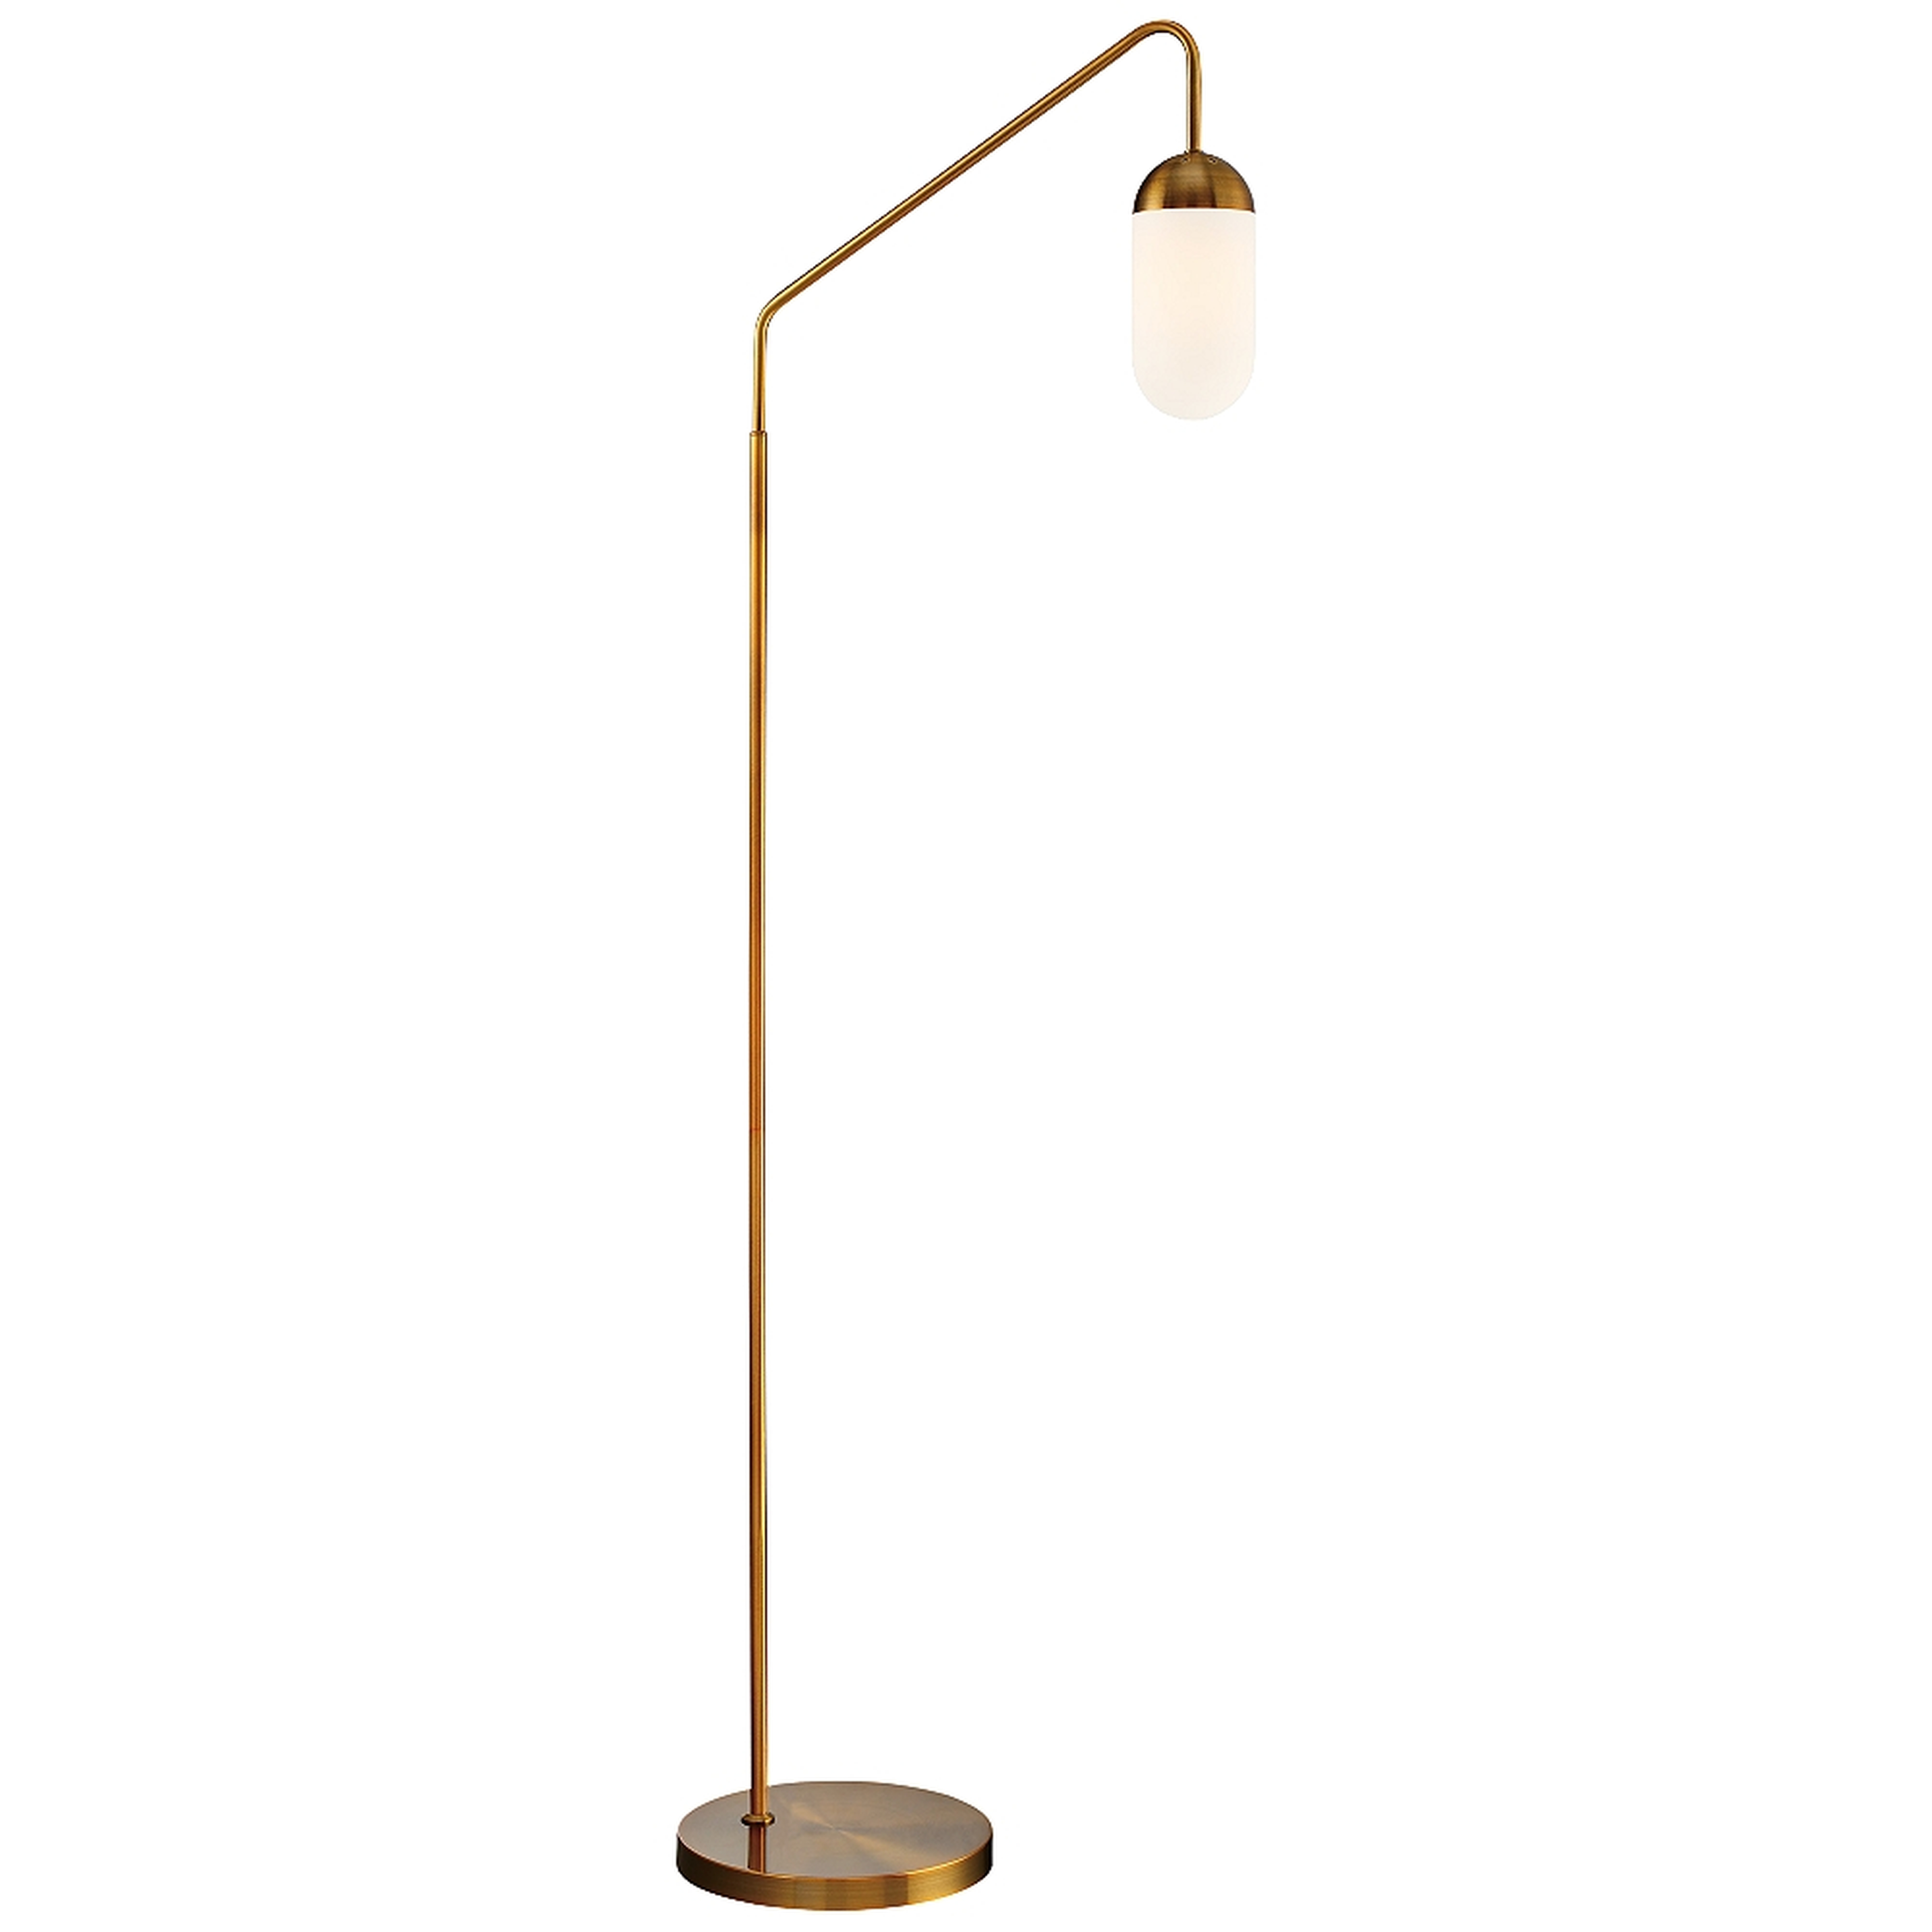 Lite Source Firefly Antique Brass Reading Floor Lamp - Style # 69G17 - Lamps Plus